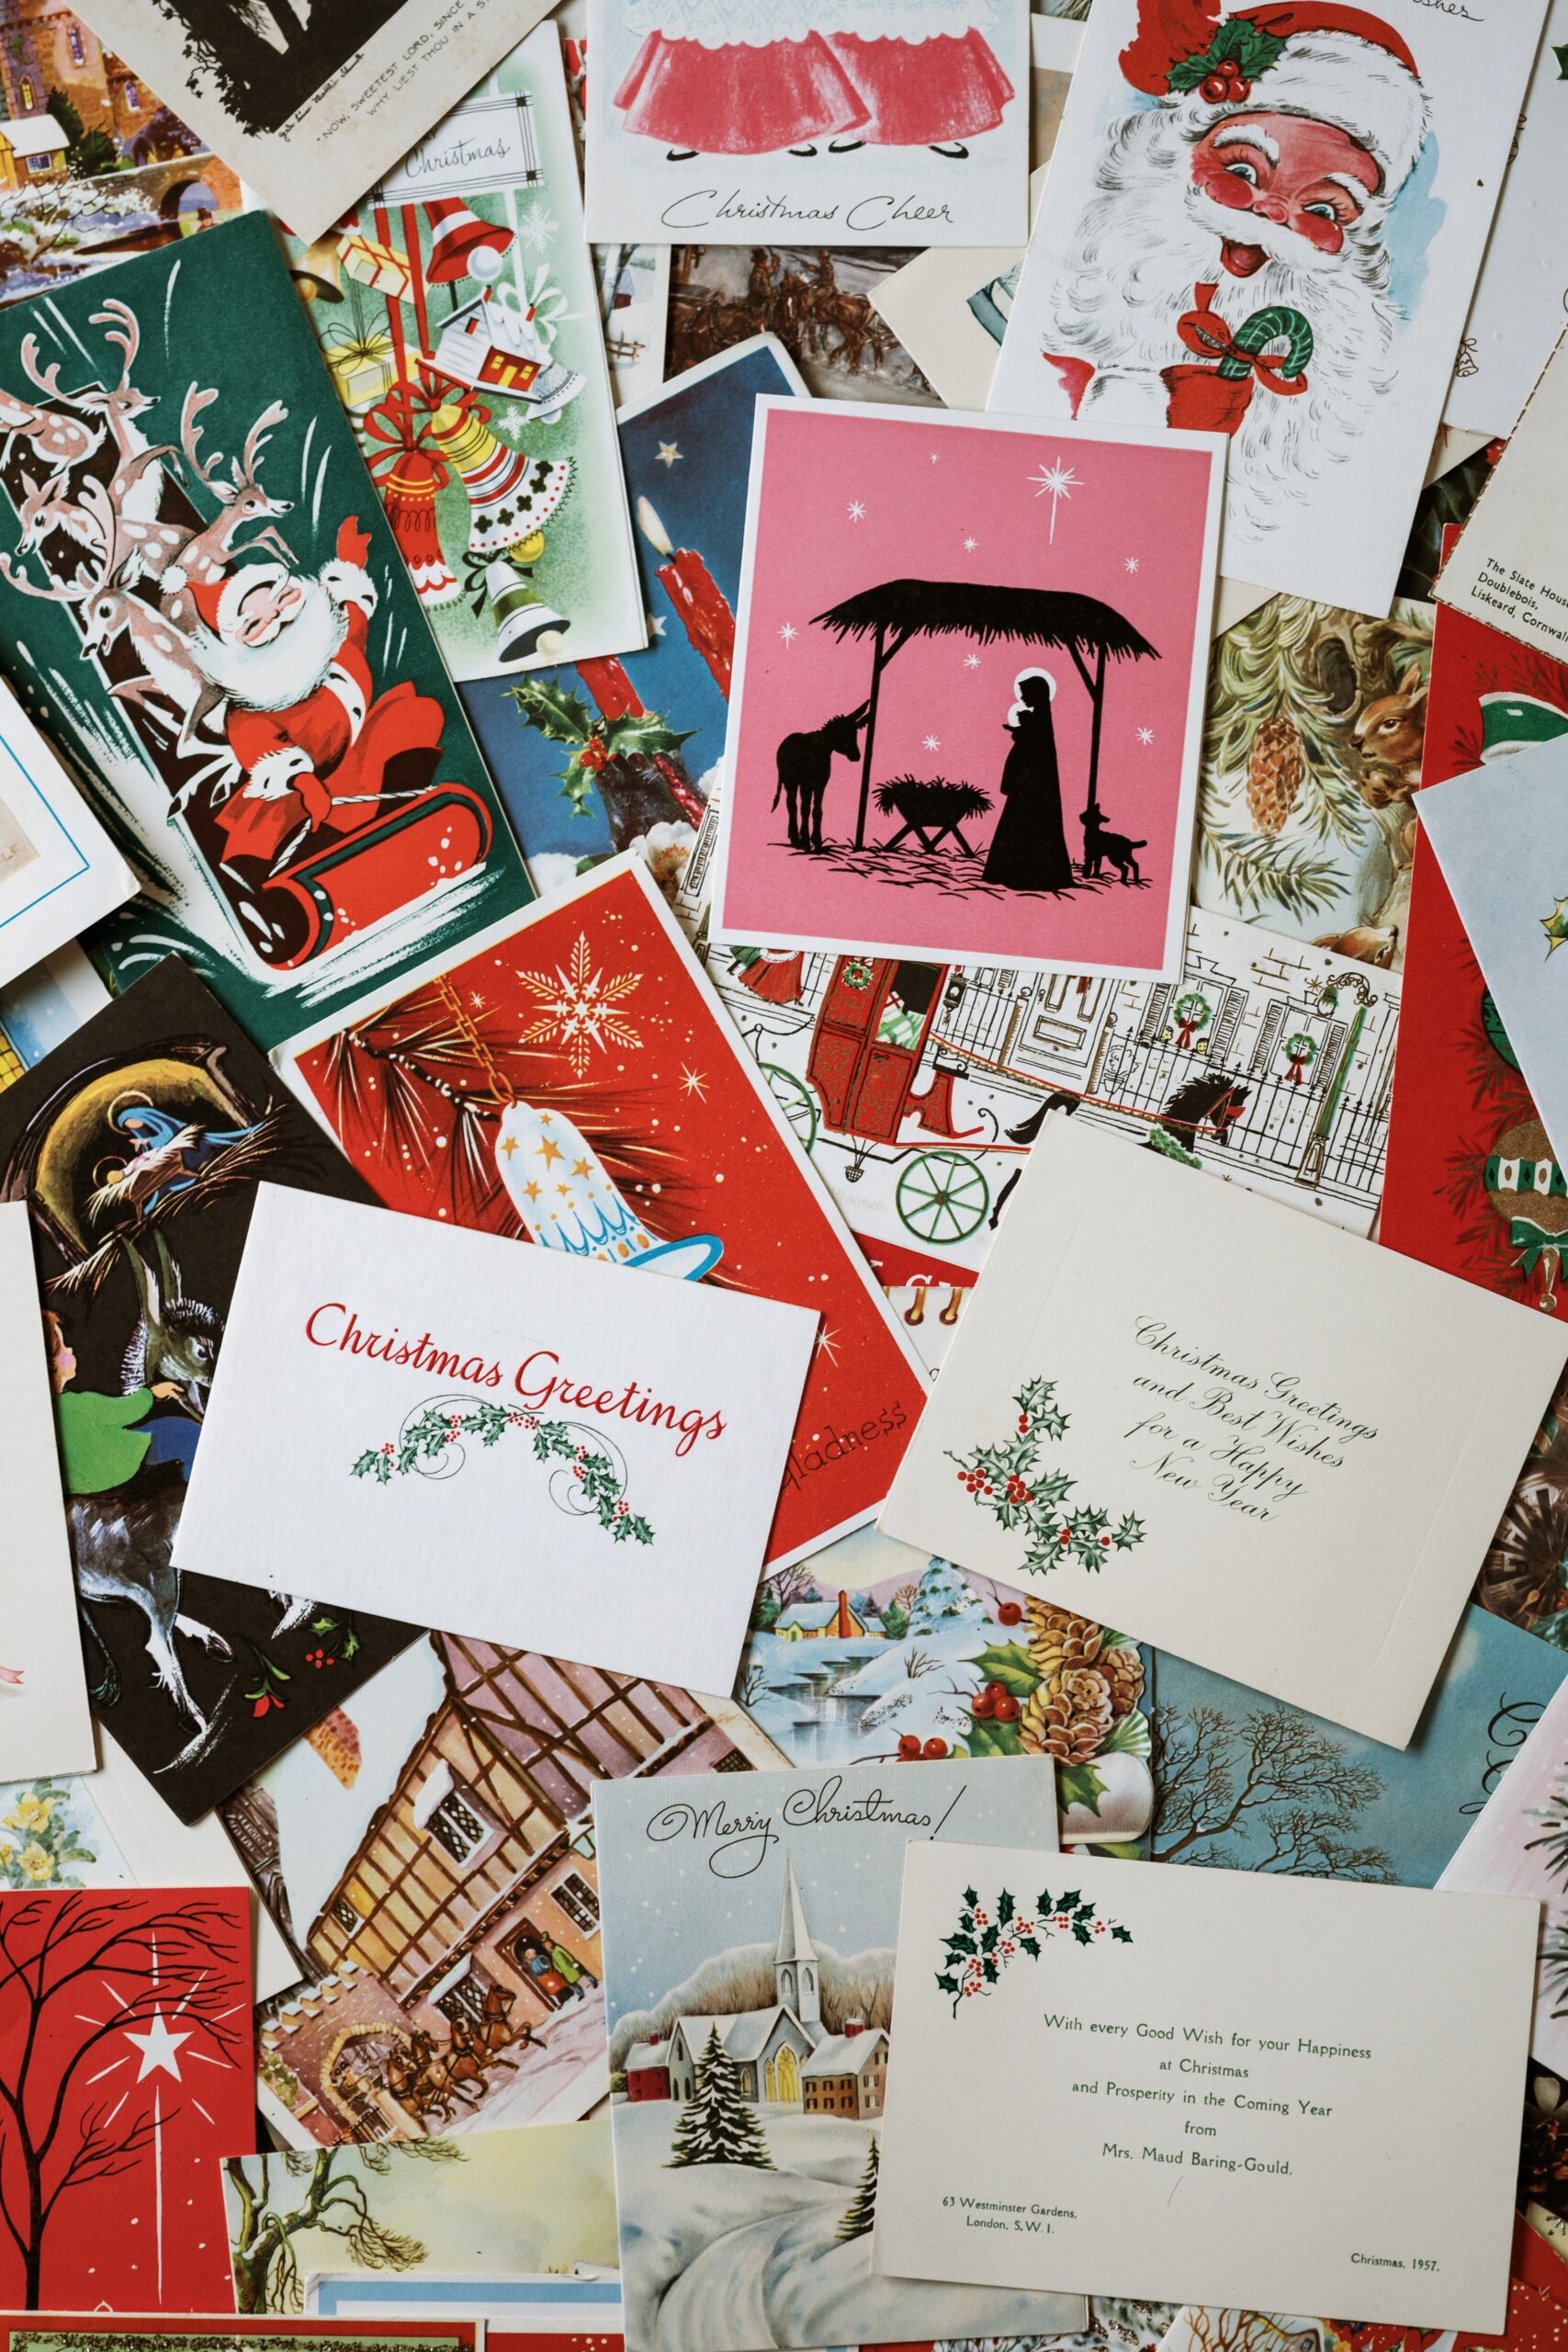 The Importance of the Christmas Cards